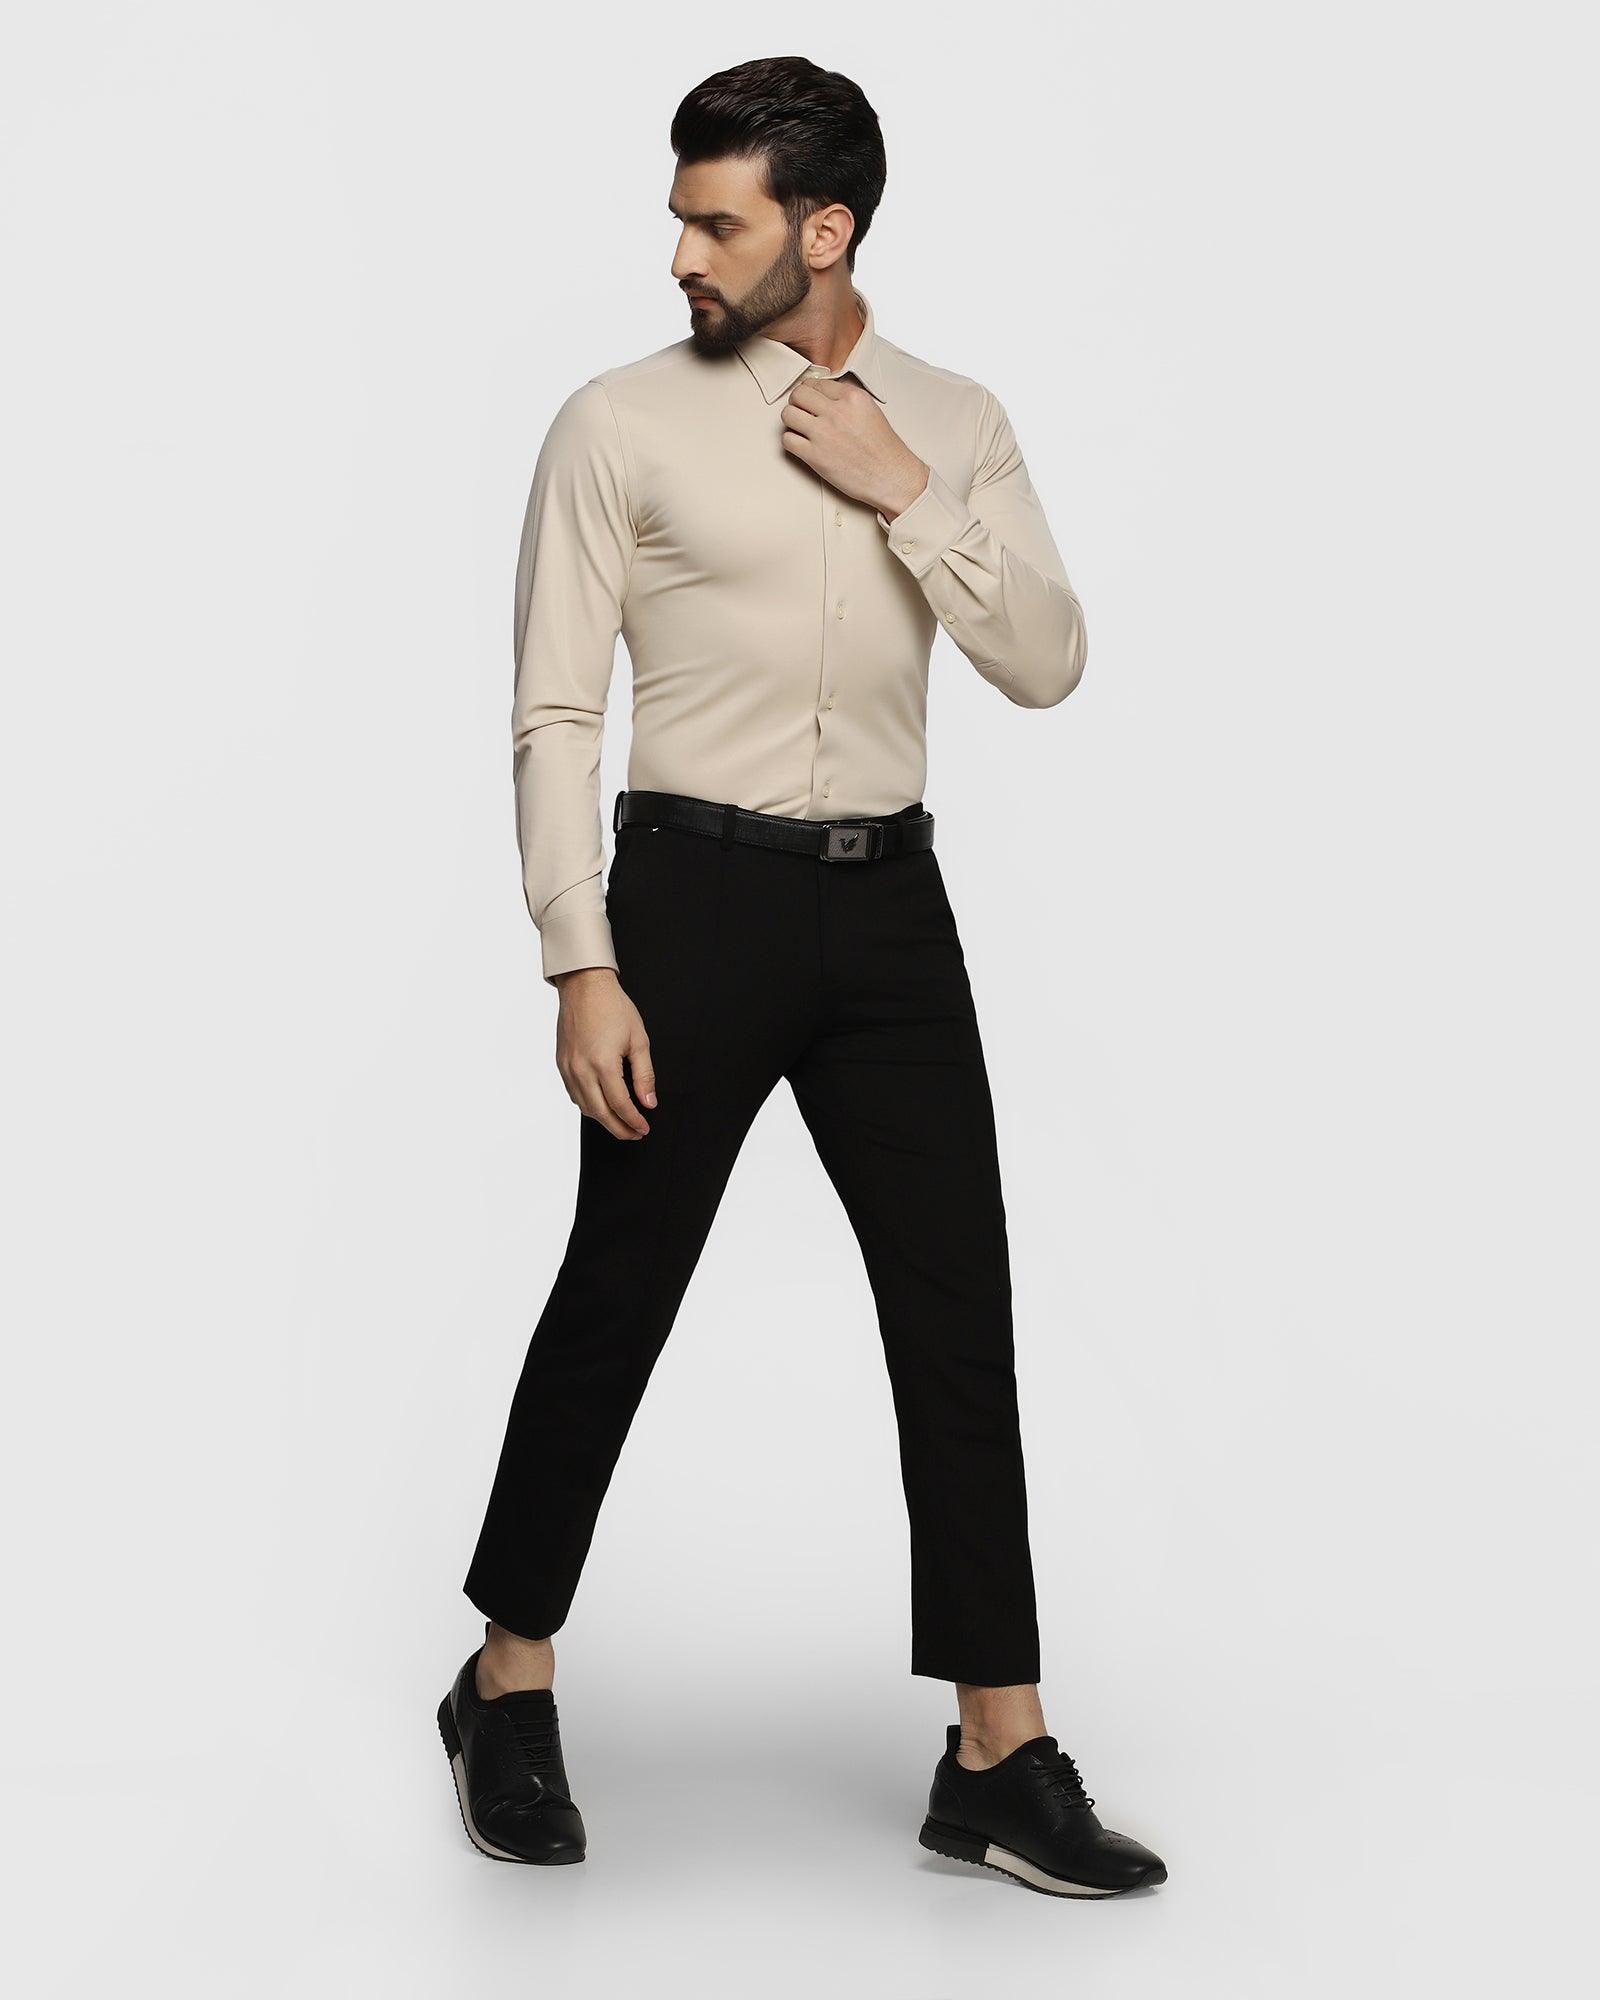 TechPro Formal Beige Solid Shirt - Payback